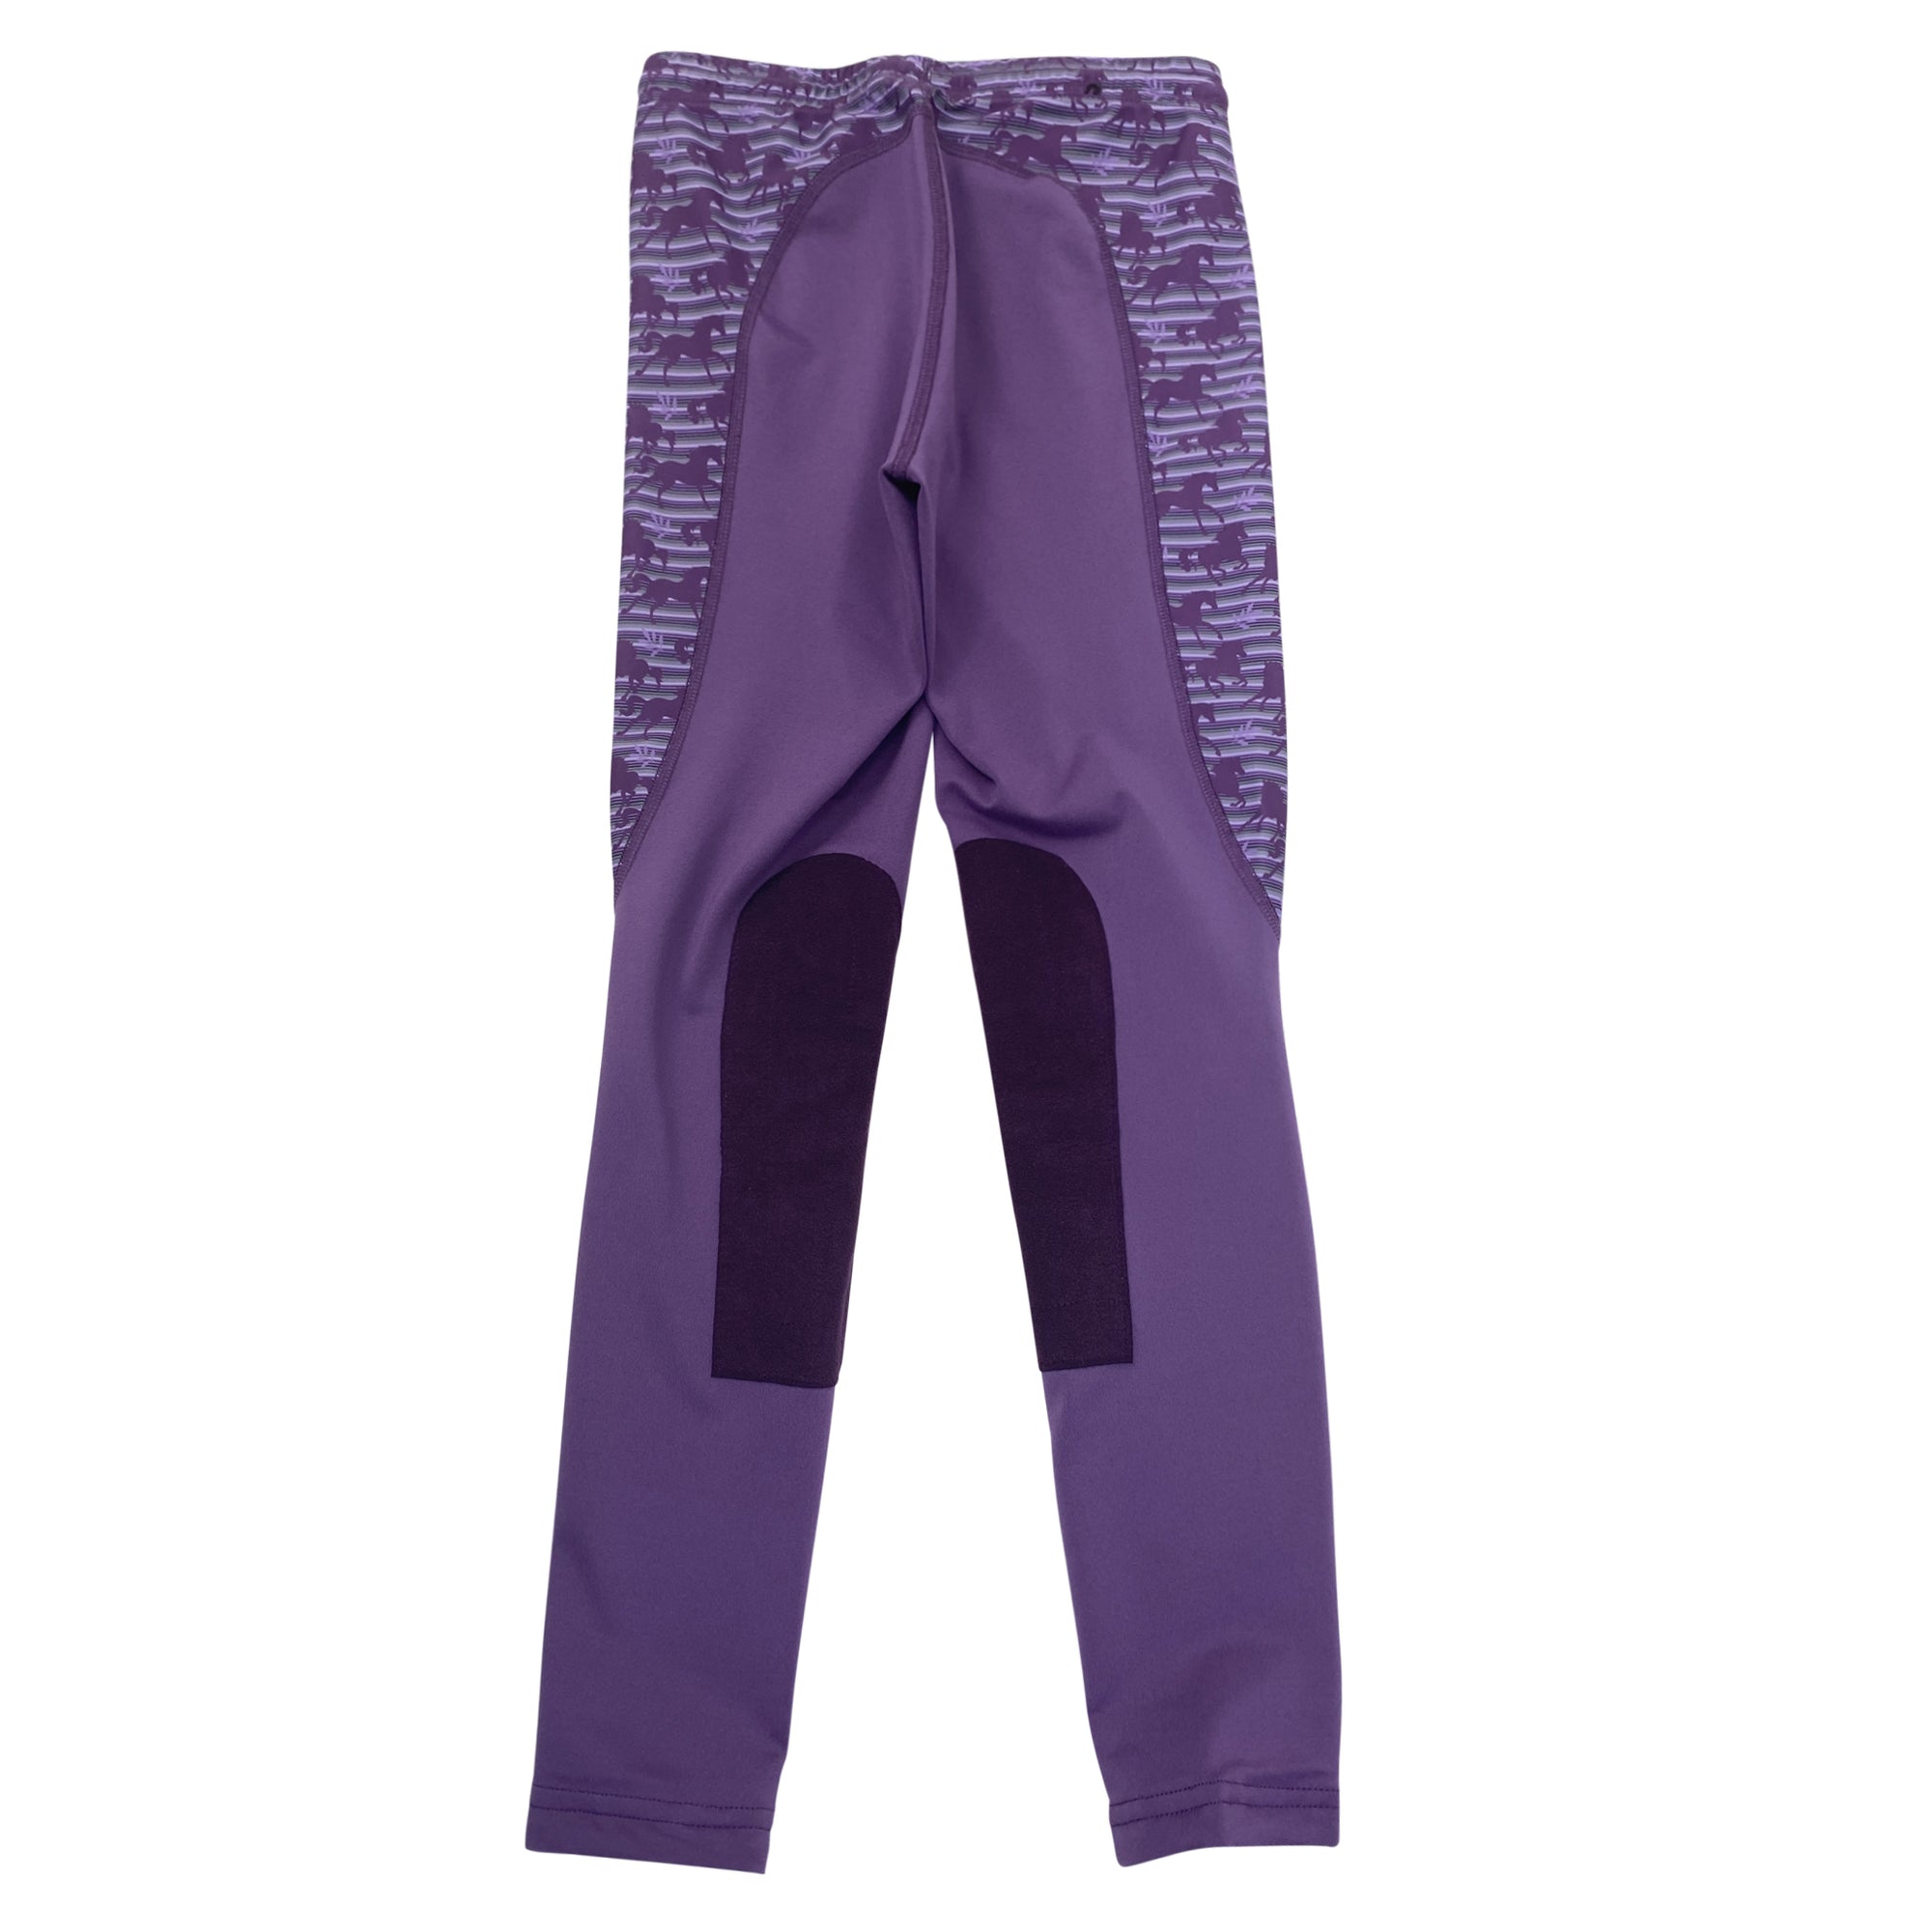 Back of Kerrits Knee Patch Performance Tights in Huckleberry/Run Free Multi - Children's Large